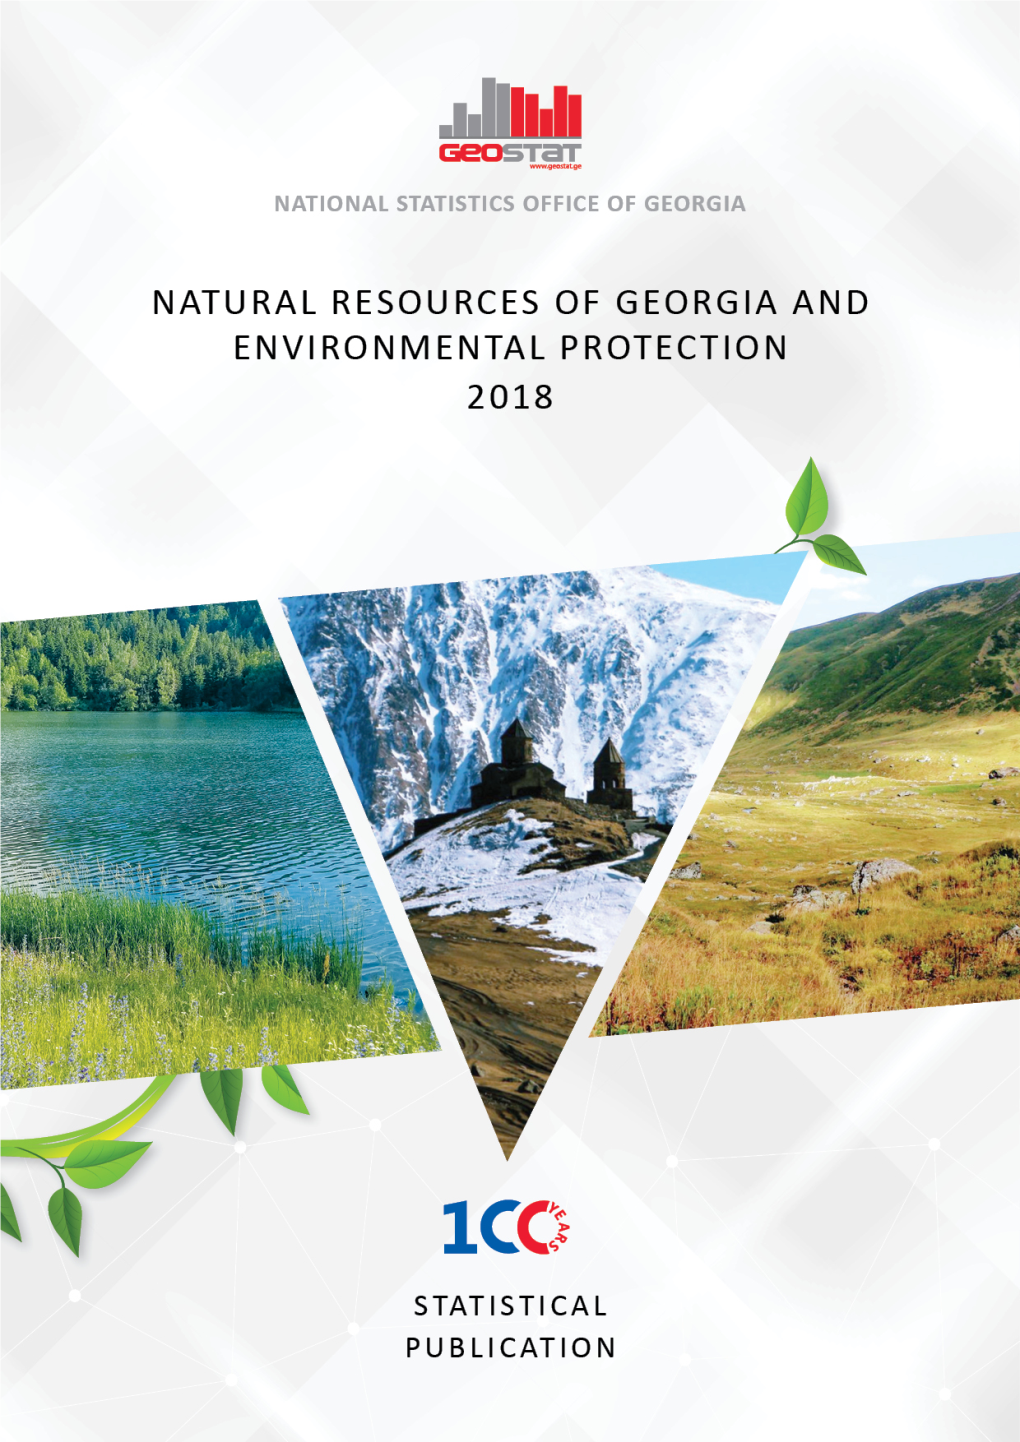 Natural Resources of Georgia and Environmental Protection 2018